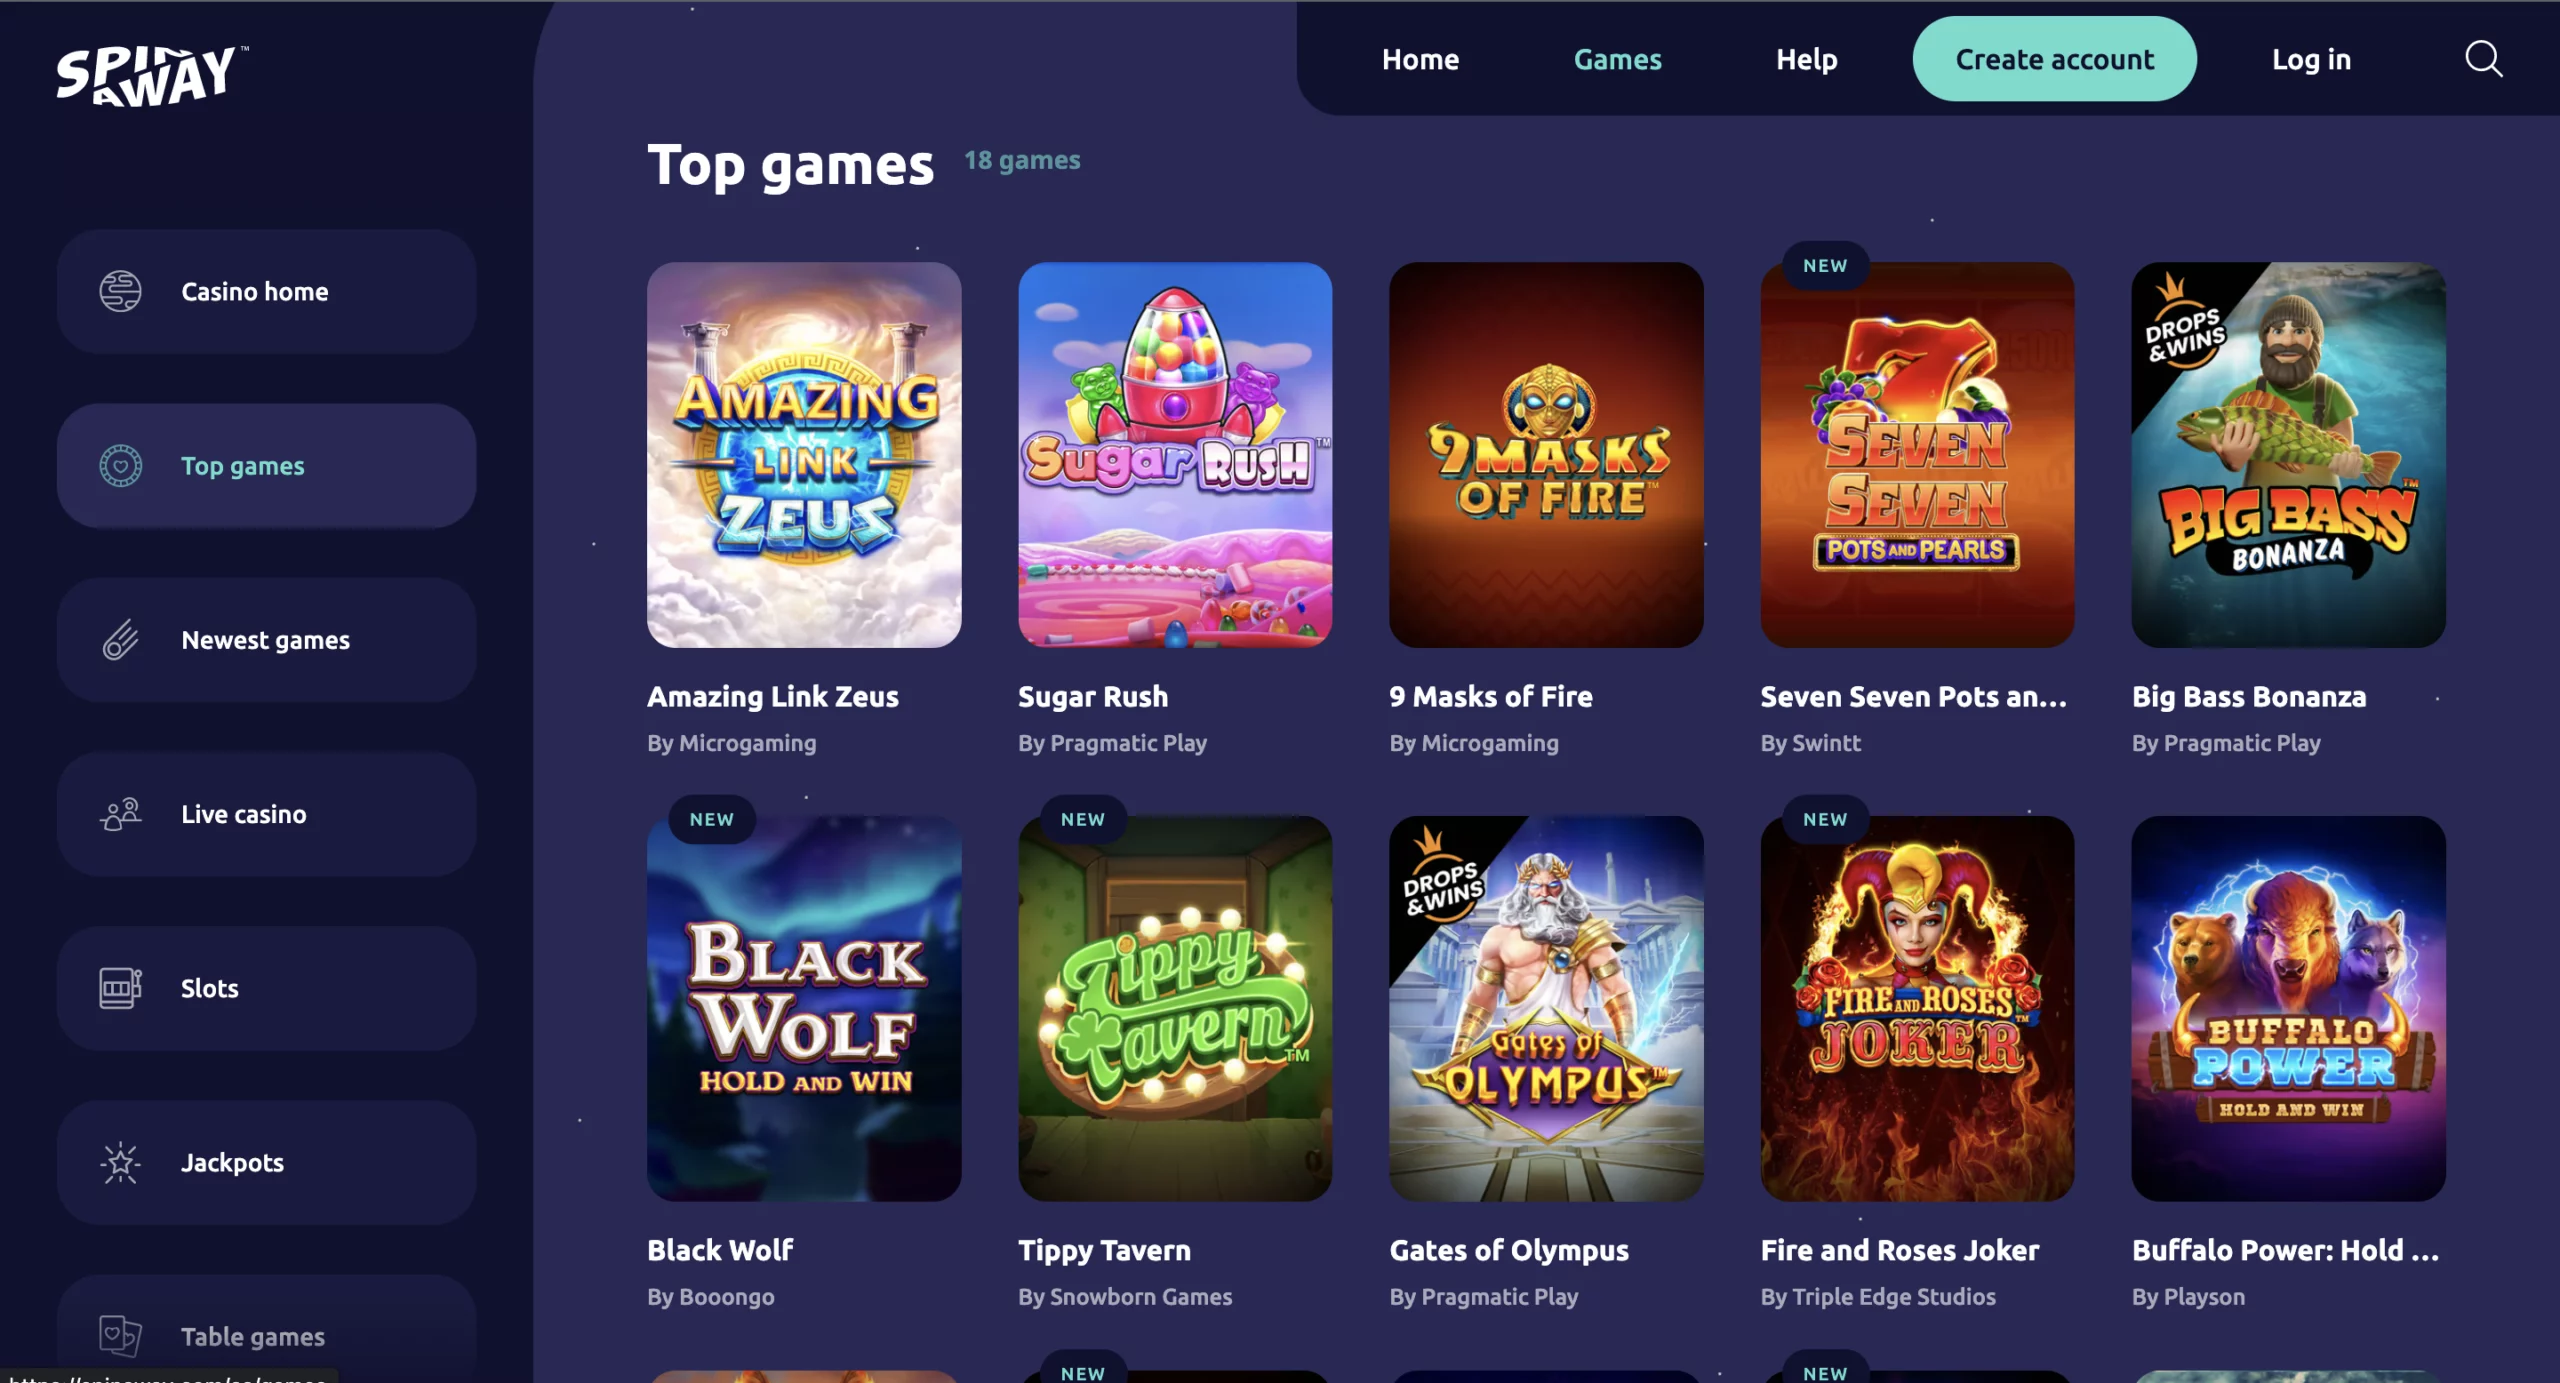 spin away casino canada review with sign up bonus and ratings from trustpilot, askgamblers, casino guru, lcb, app store and google play by bestbonuslist.com